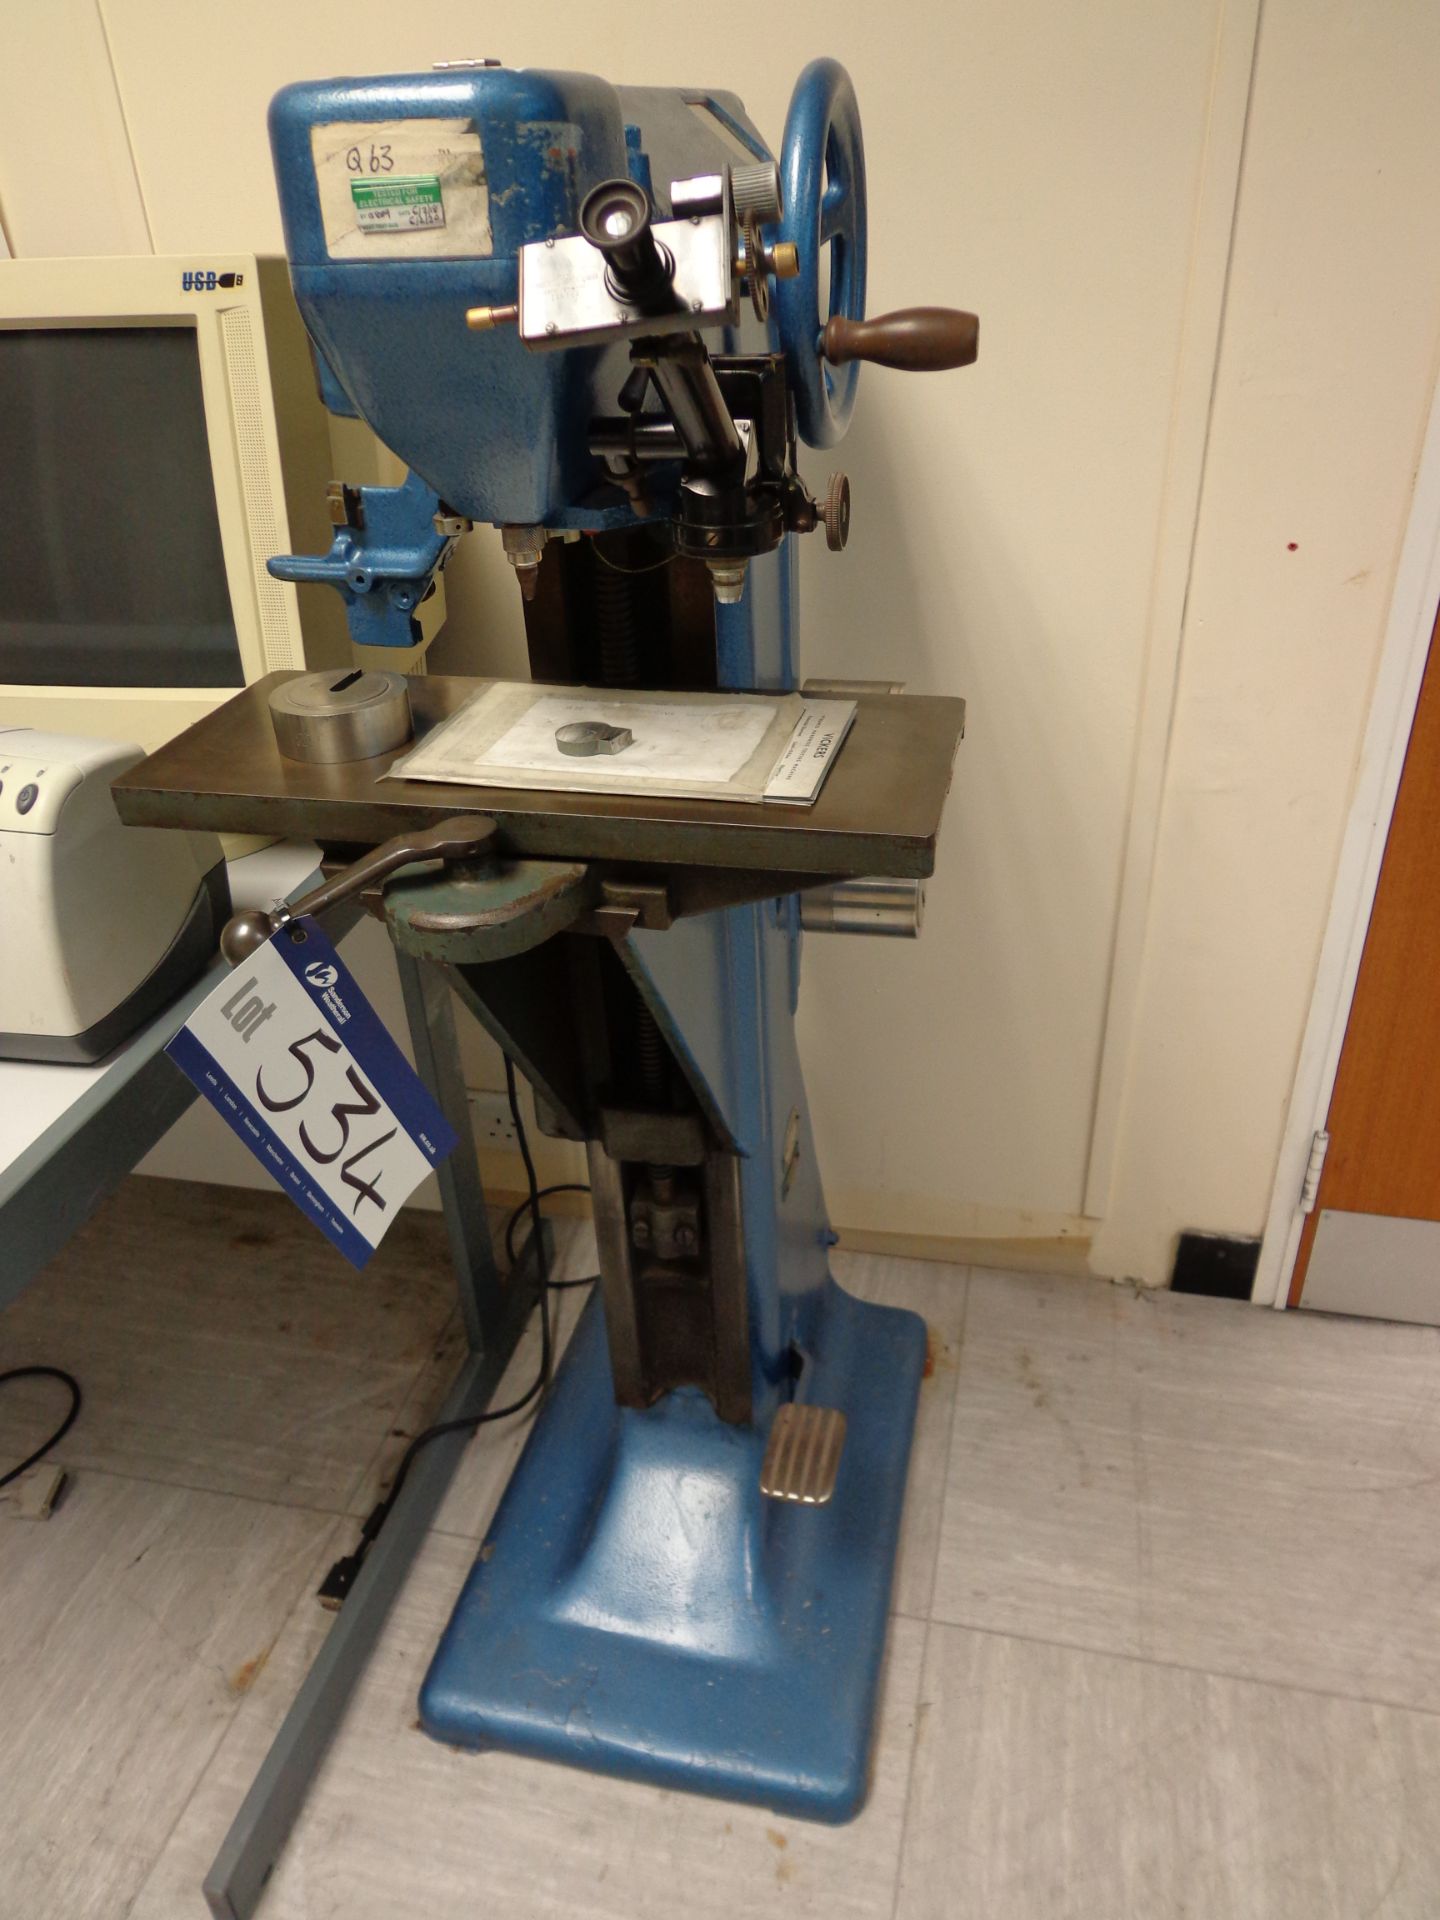 Vickers Armstrong Pyramid Hardness Testing Machine, serial number: 245848, Calibrated to April 2019